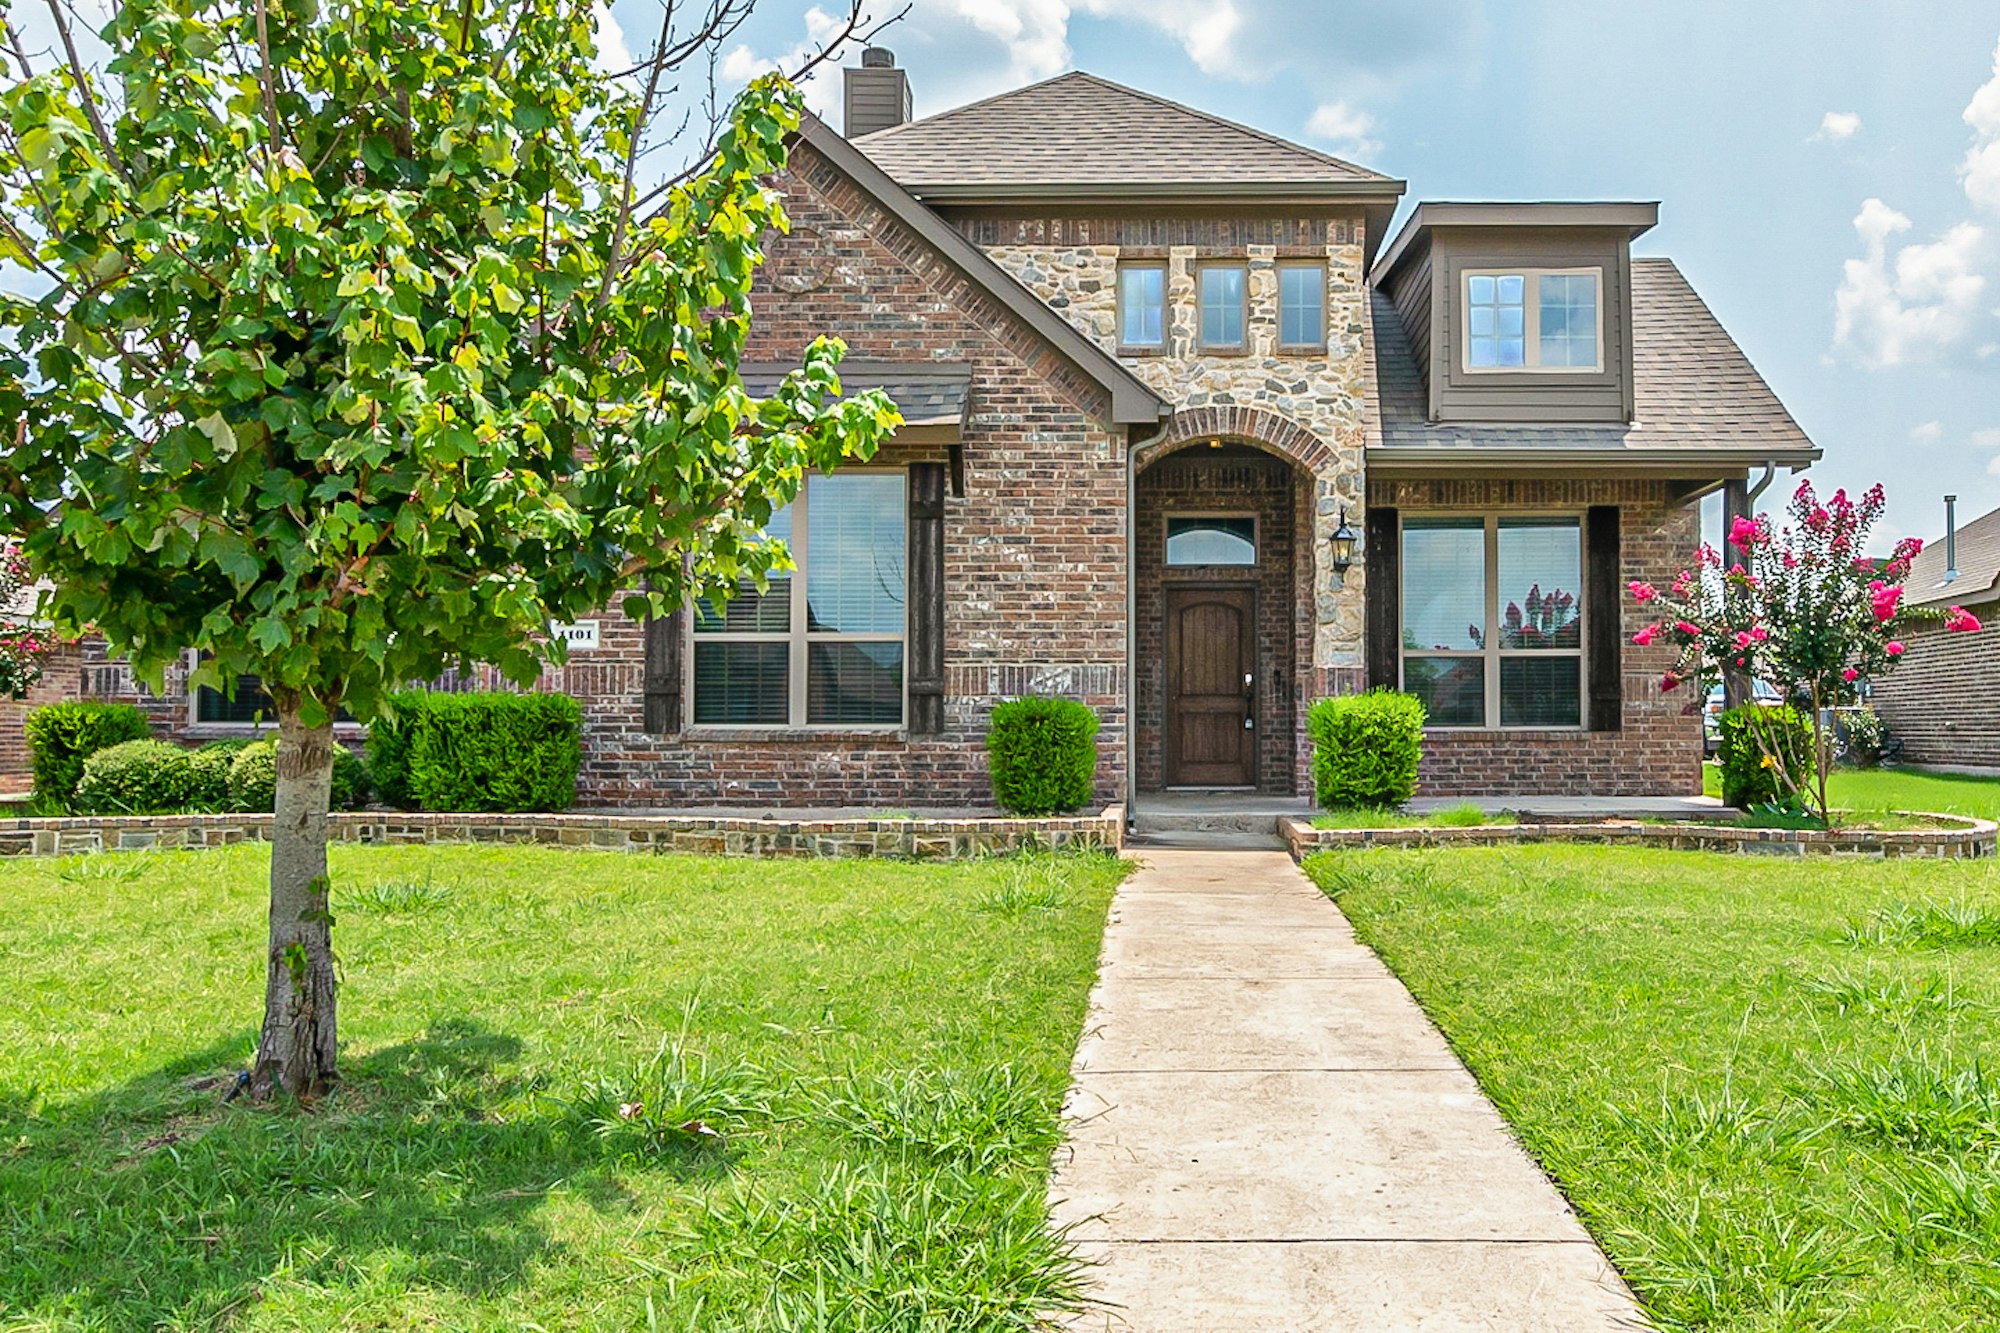 Photo 1 of 26 - 1101 Colonial Dr, Royse City, TX 75189